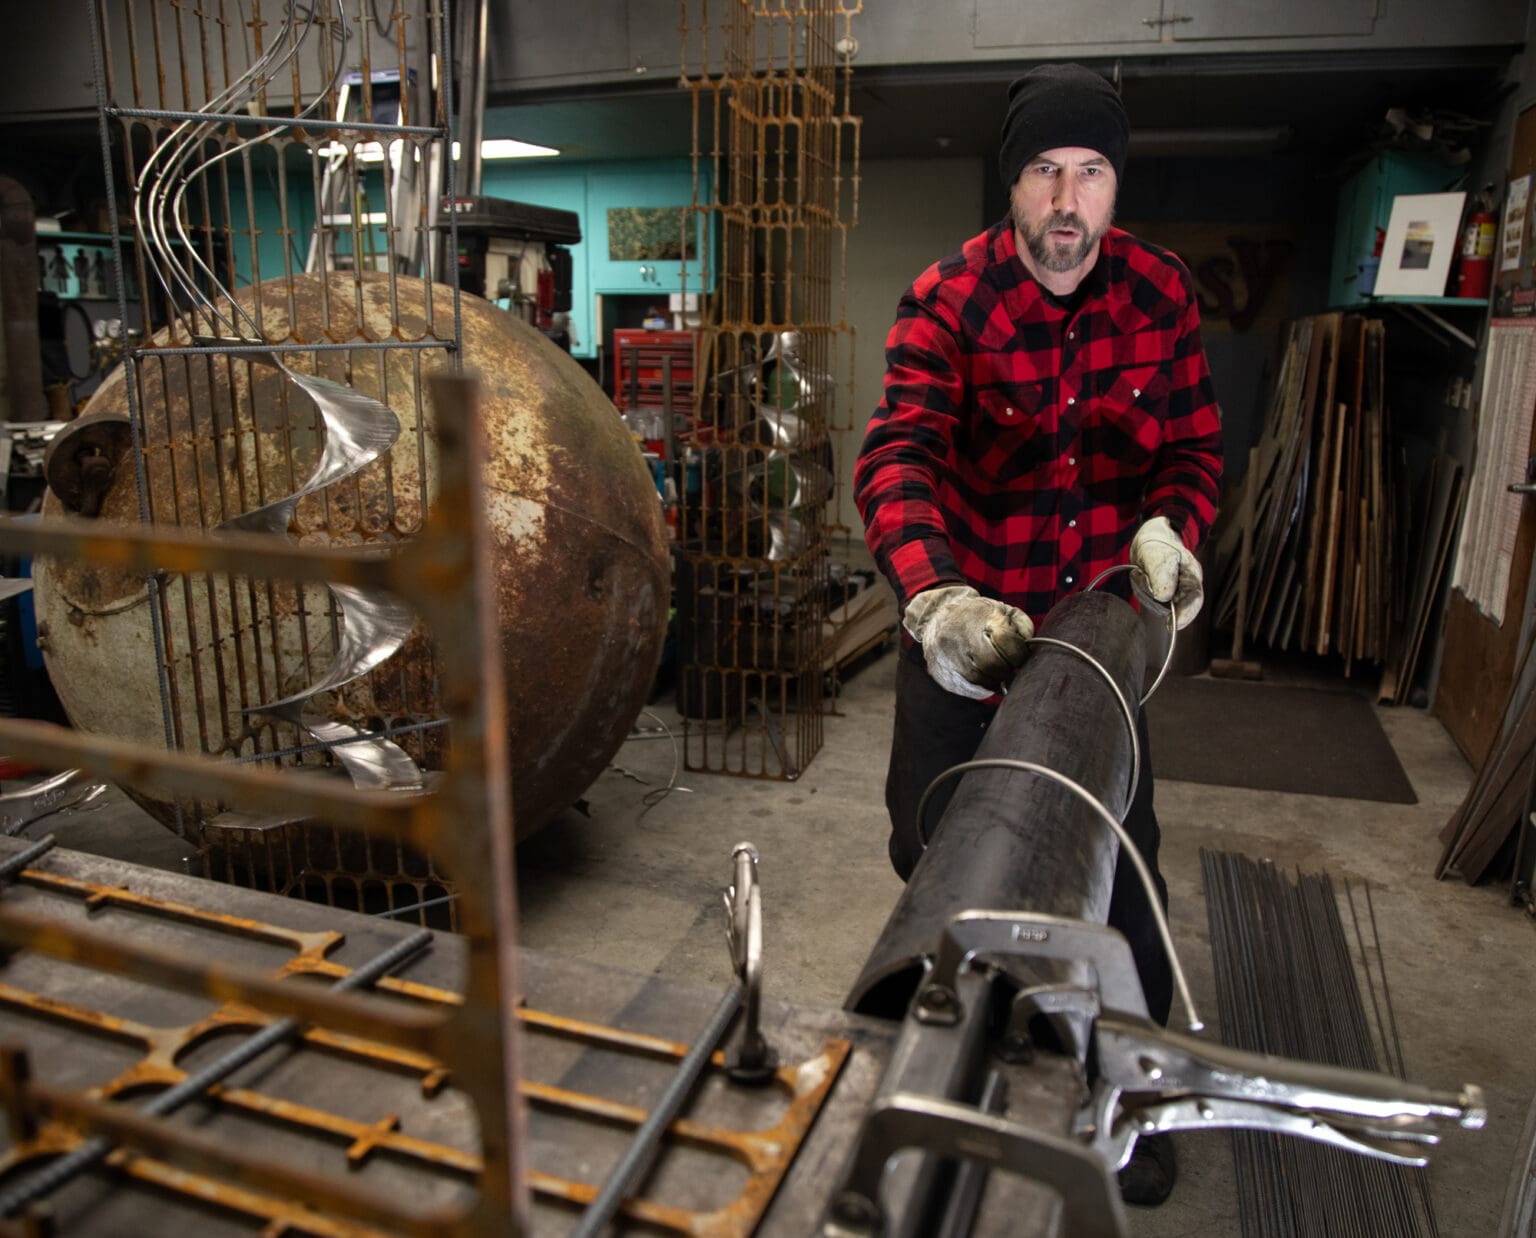 Andy Phillips wraps a metal rod into a spiral on Tuesday